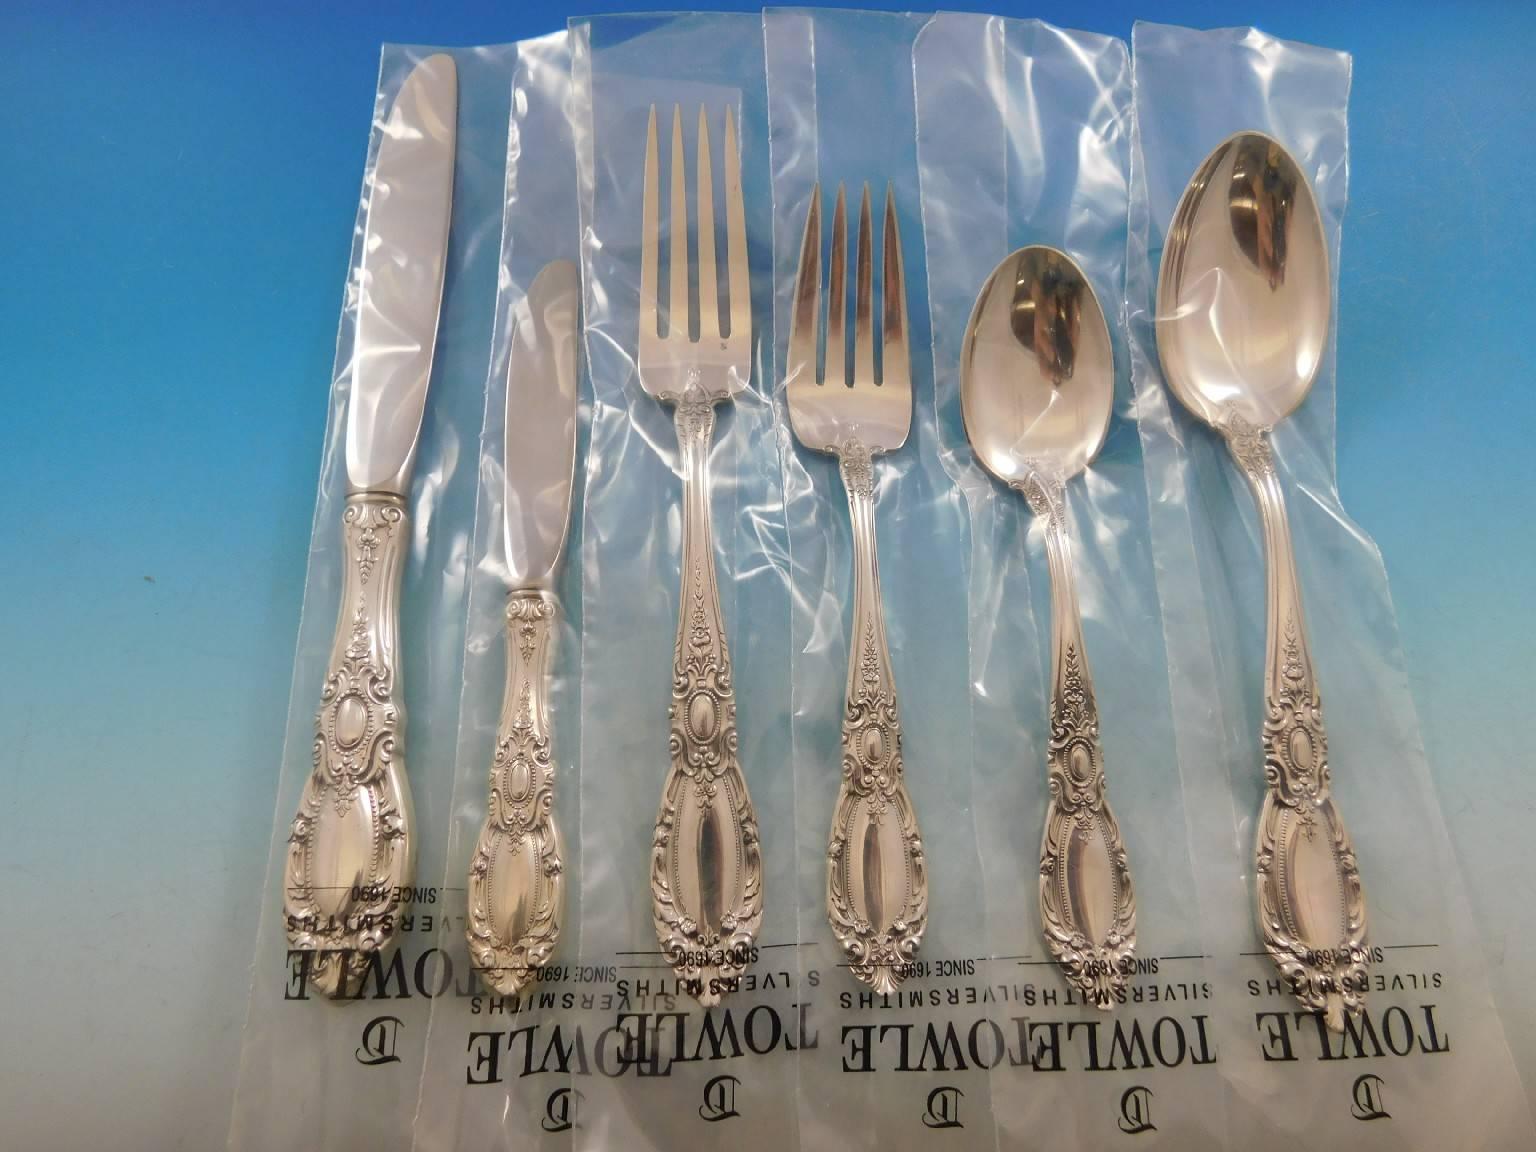 New, unused King Richard by Towle sterling silver flatware set - 72 pieces. This set includes:

12 knives, 8 7/8